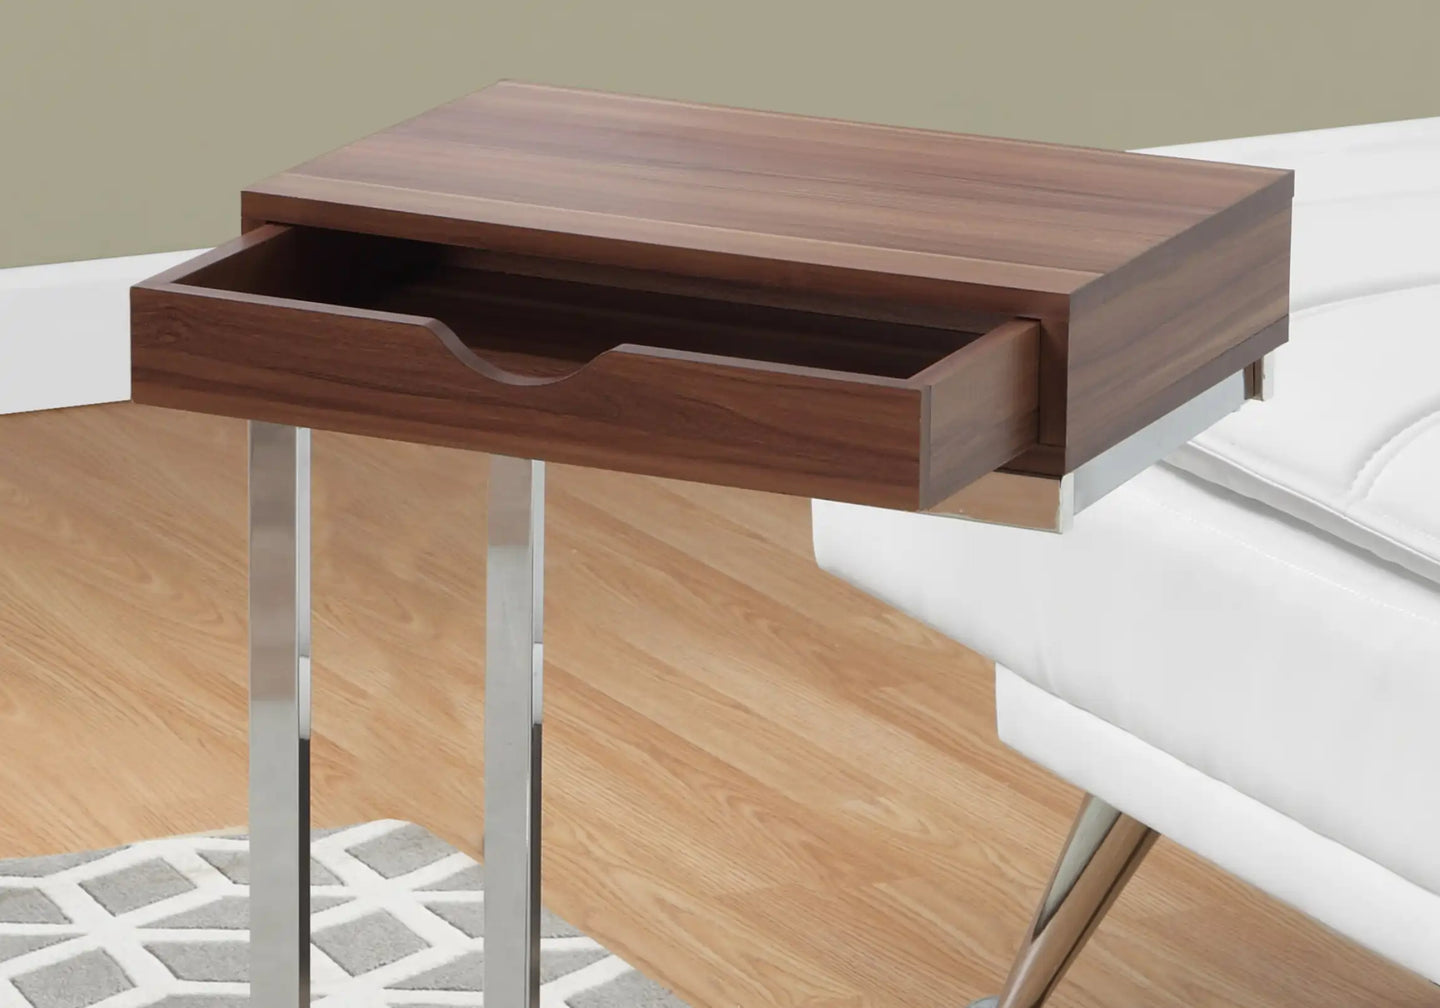 Walnut Accent Table / C Table - I 3070